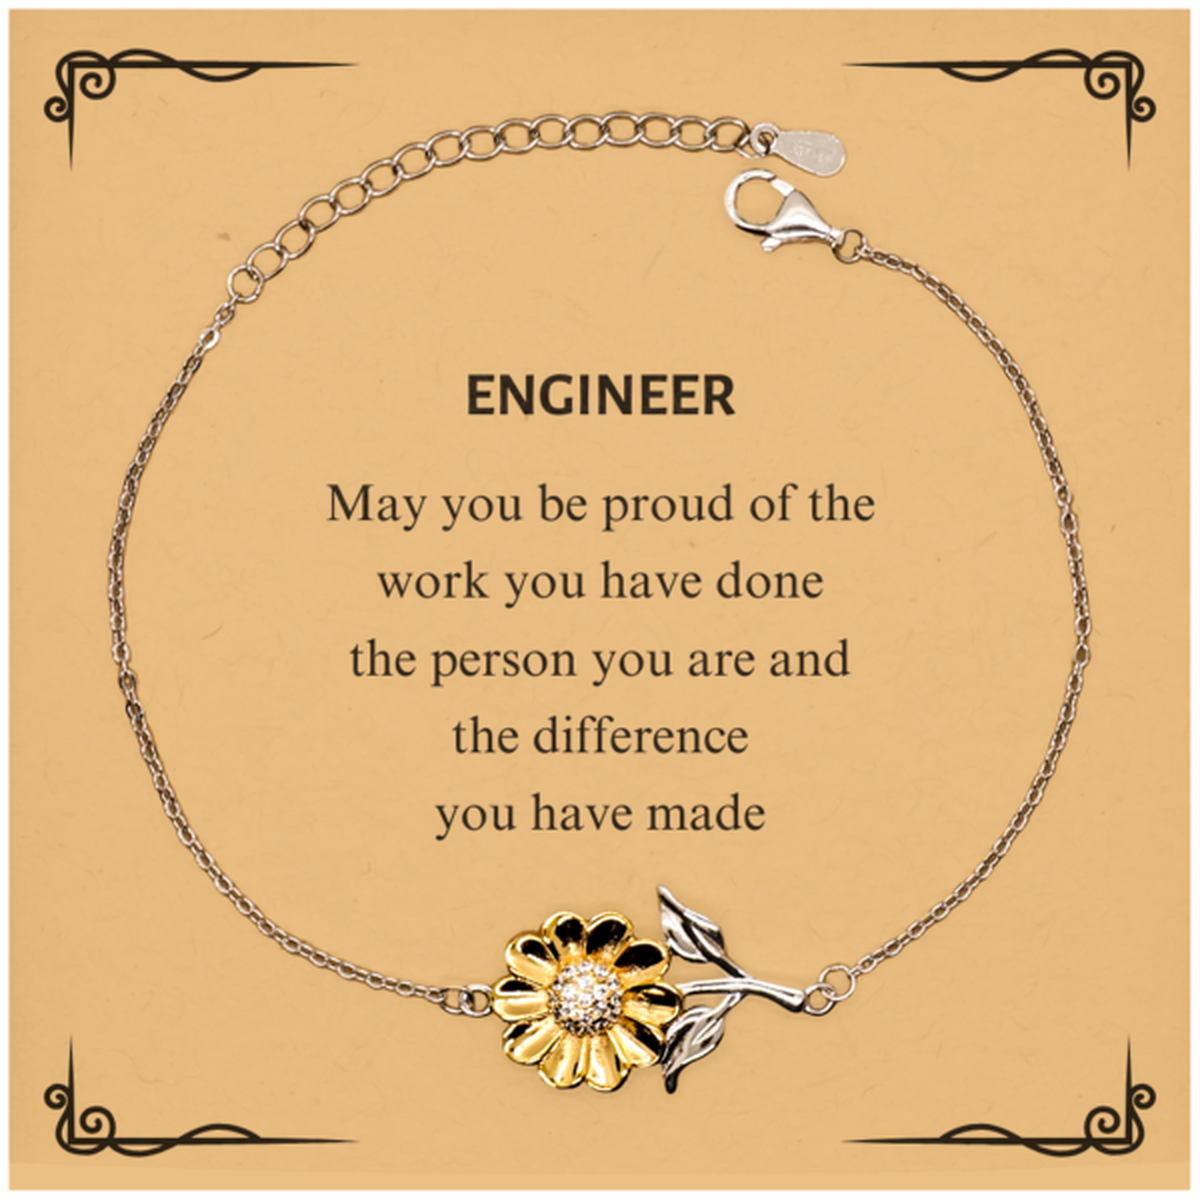 Engineer May you be proud of the work you have done, Retirement Engineer Sunflower Bracelet for Colleague Appreciation Gifts Amazing for Engineer